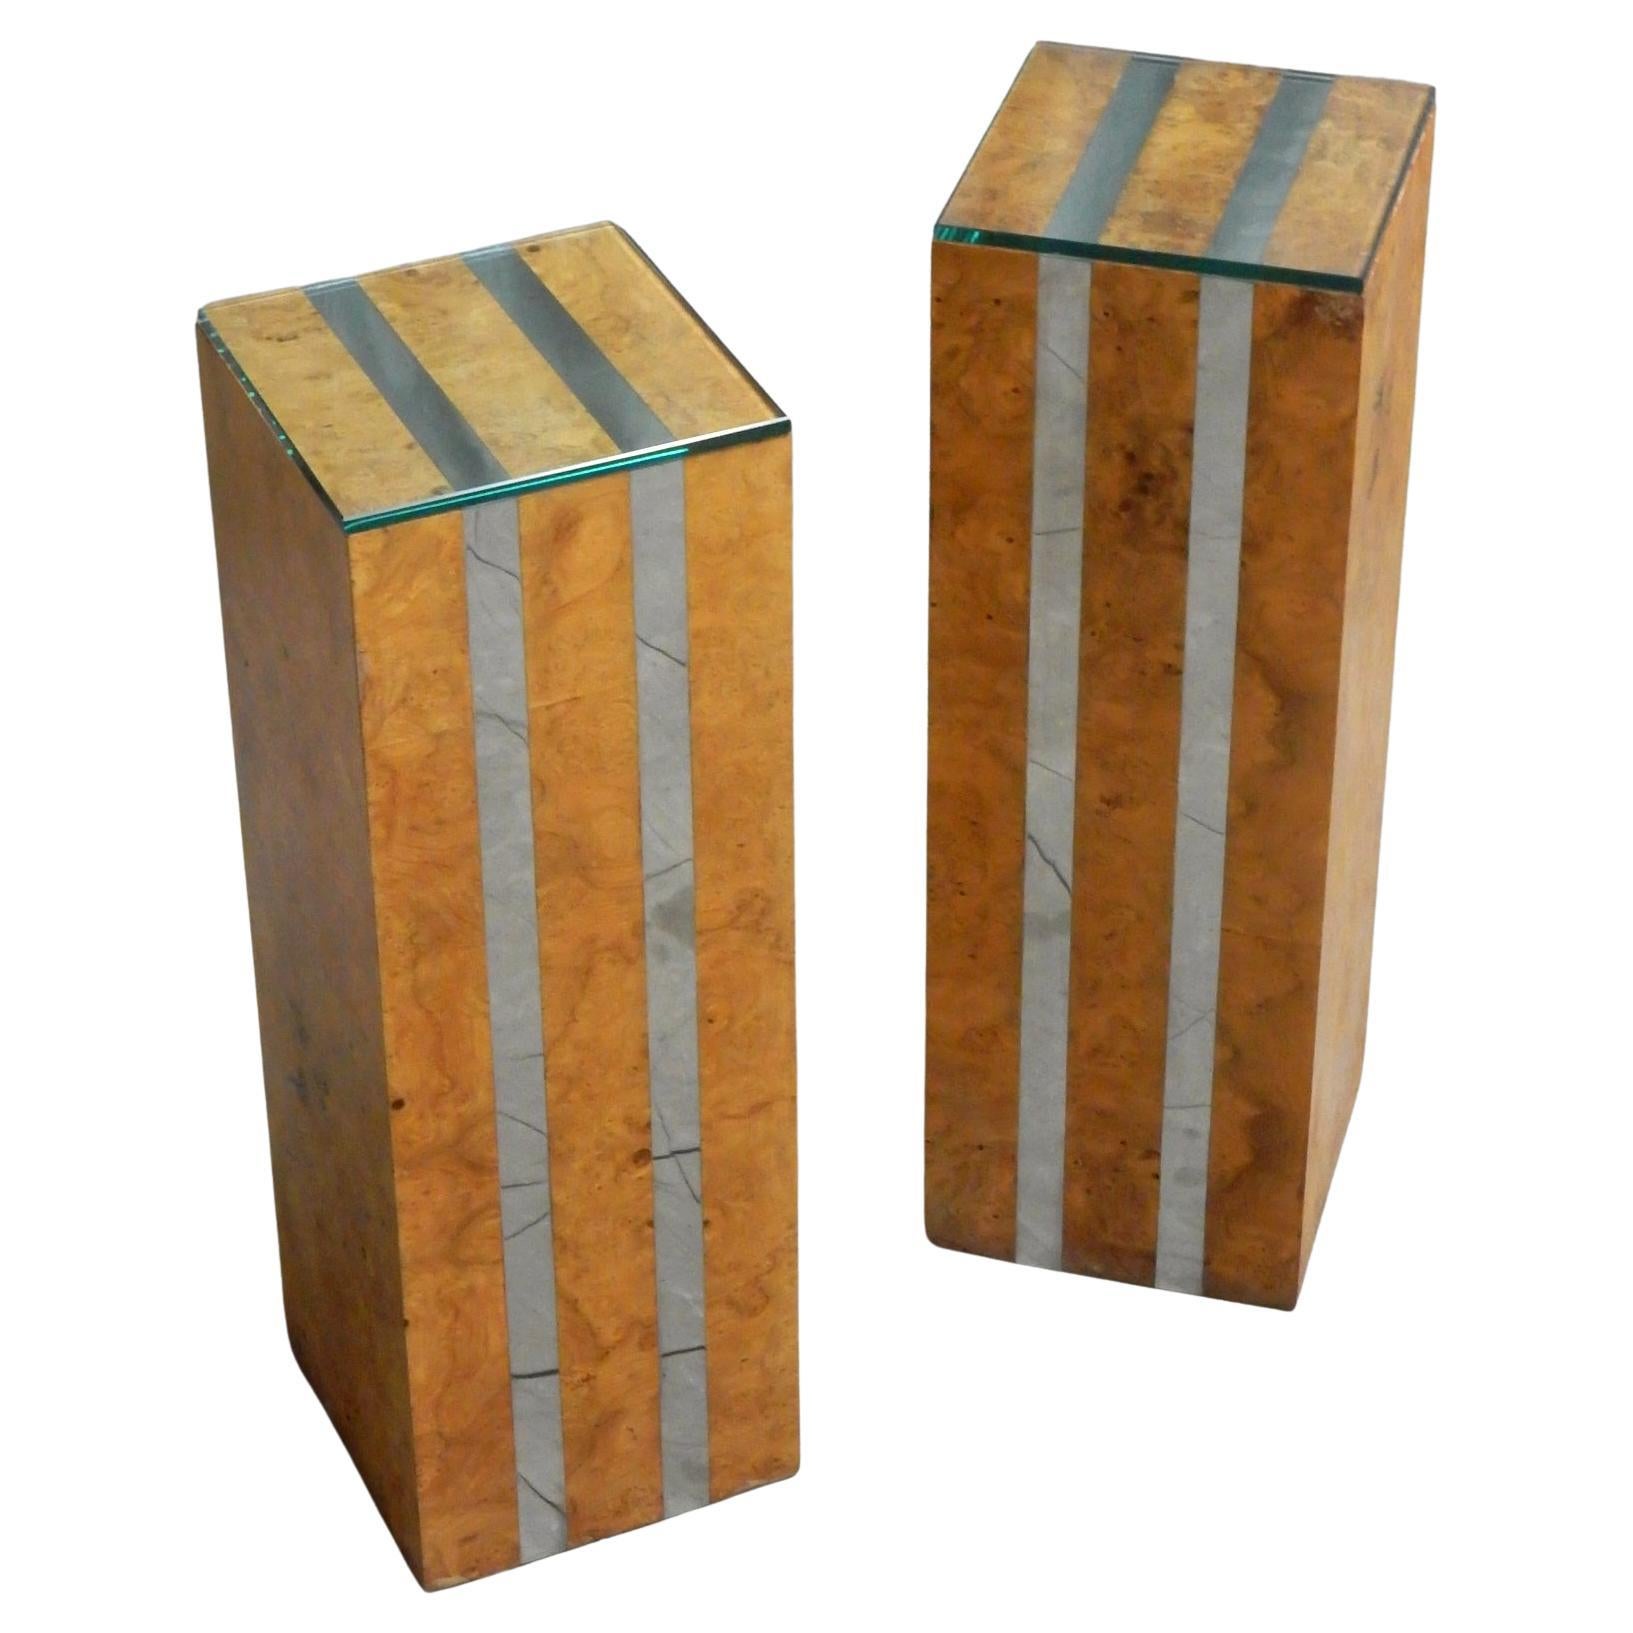 Wooden pedestals with patchwork Olive burl wood veneer with a pair of chrome steel stripes. 1/2 inch glass tops. Circa 1970's .
A few top and bottom edge wear in veneer with filler patch. Please see pictures.
Nothing detracts.